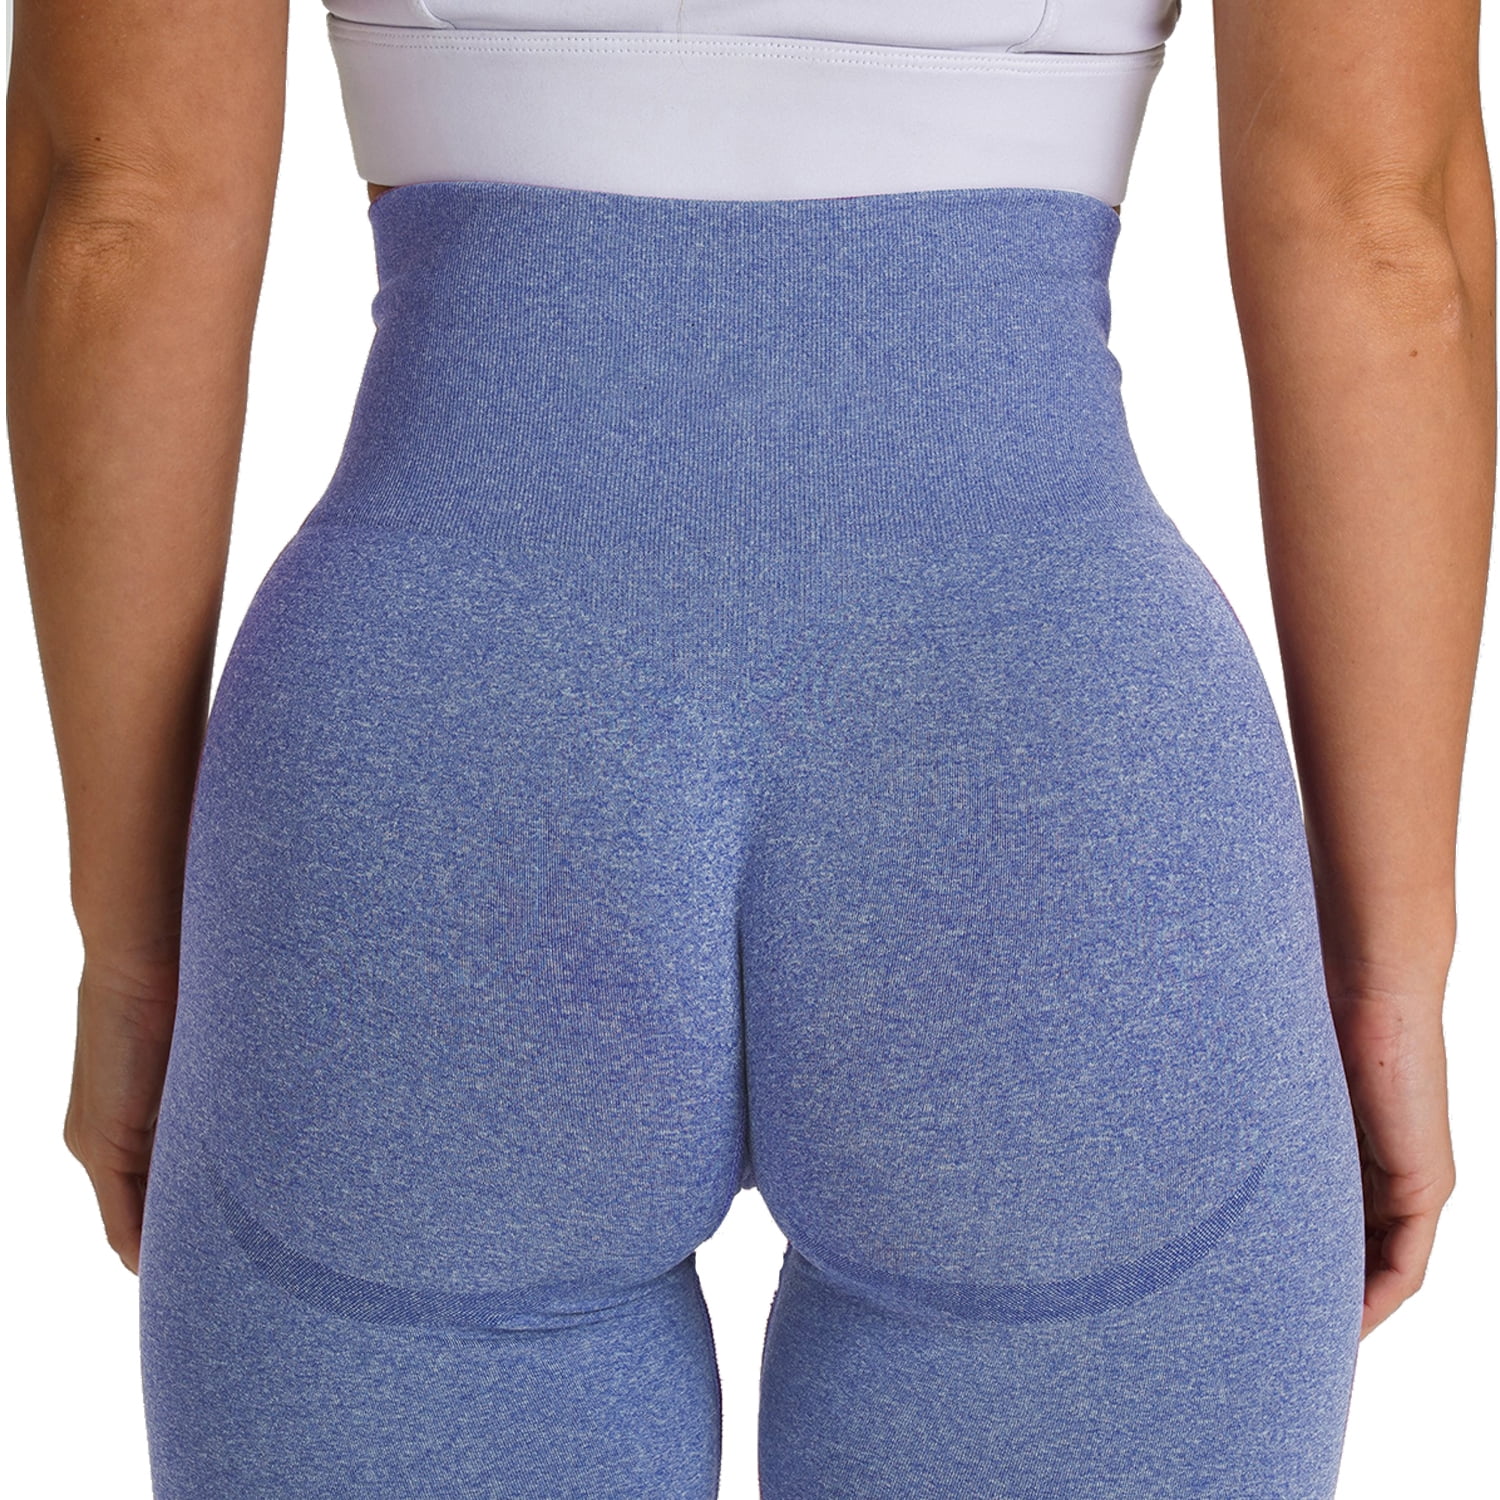 MISS MOLY High Waist Yoga Leggings for Women Sexy Ruched Butt Lift